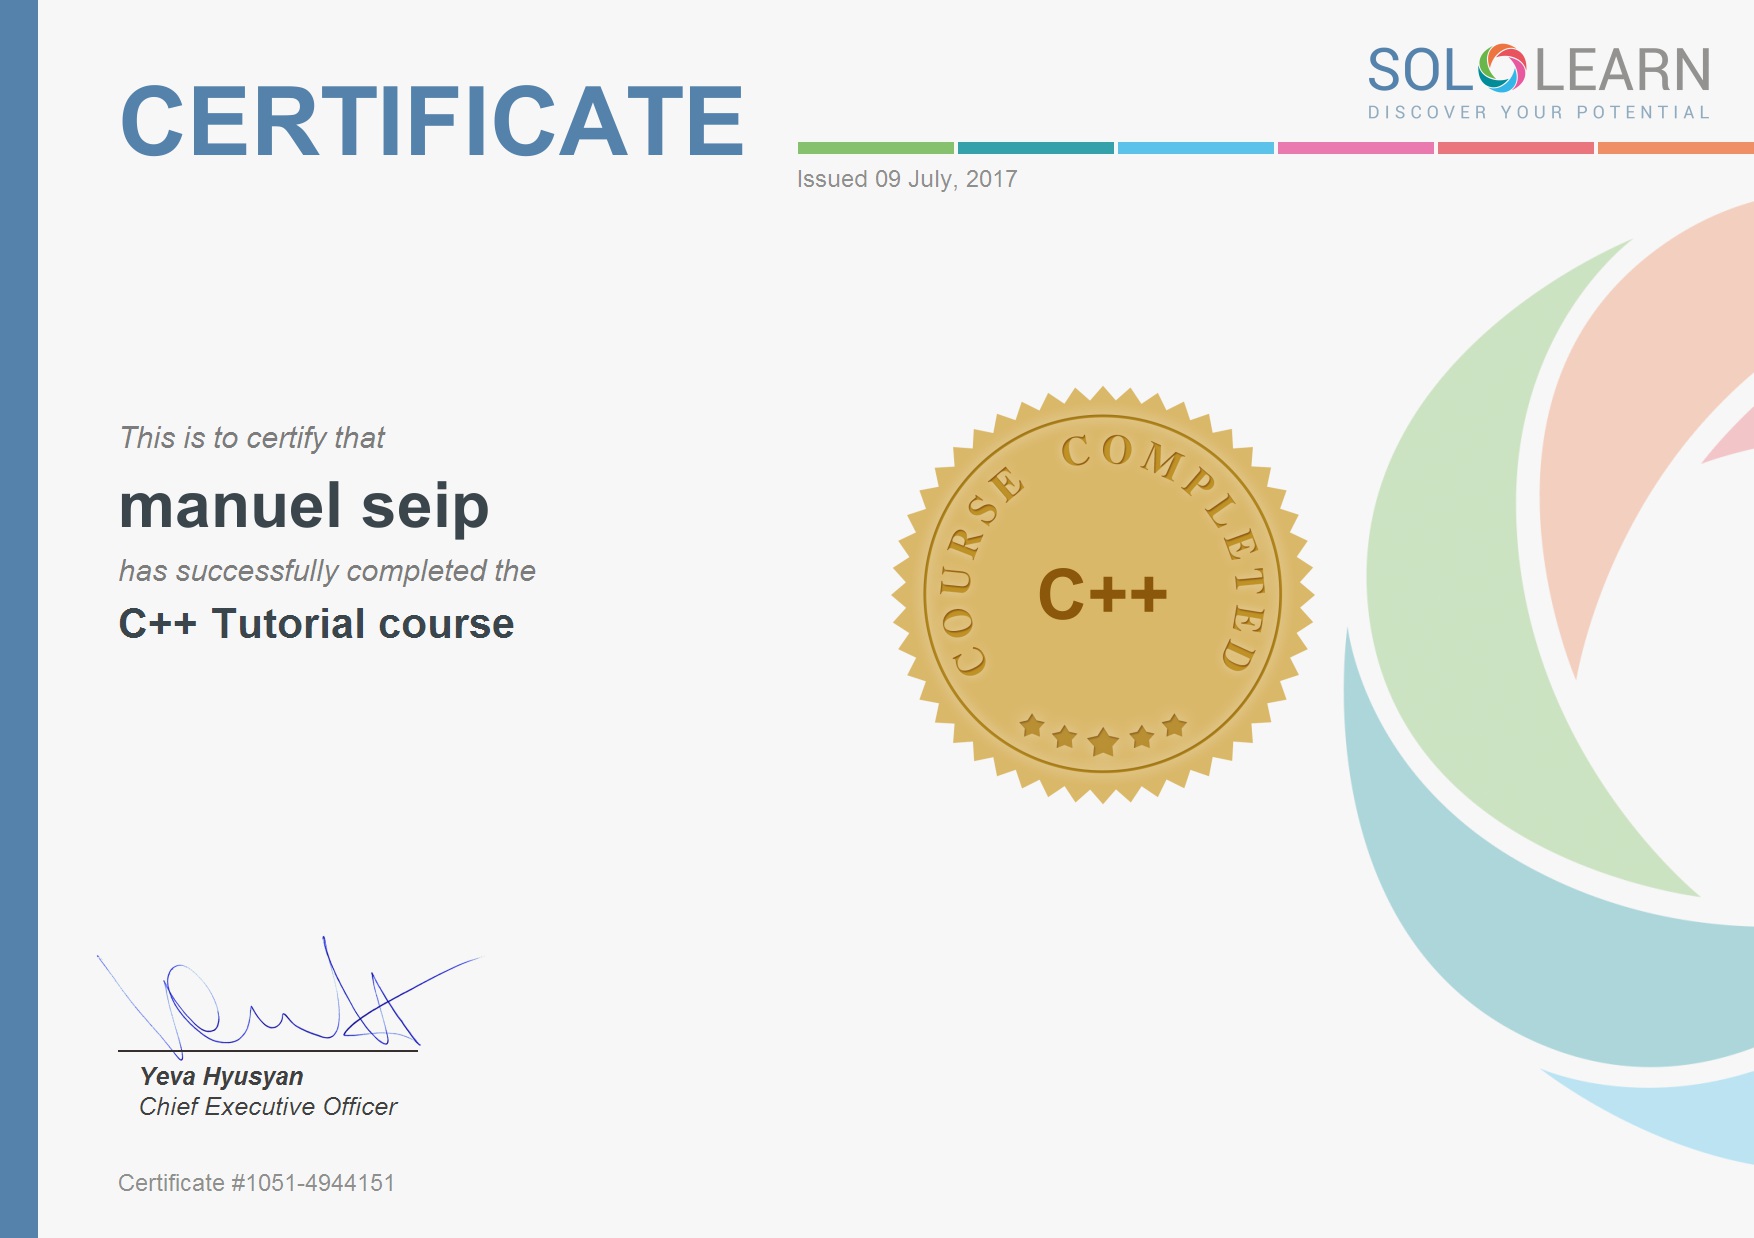 C++ Tutorial Course Certificate from SoloLearn